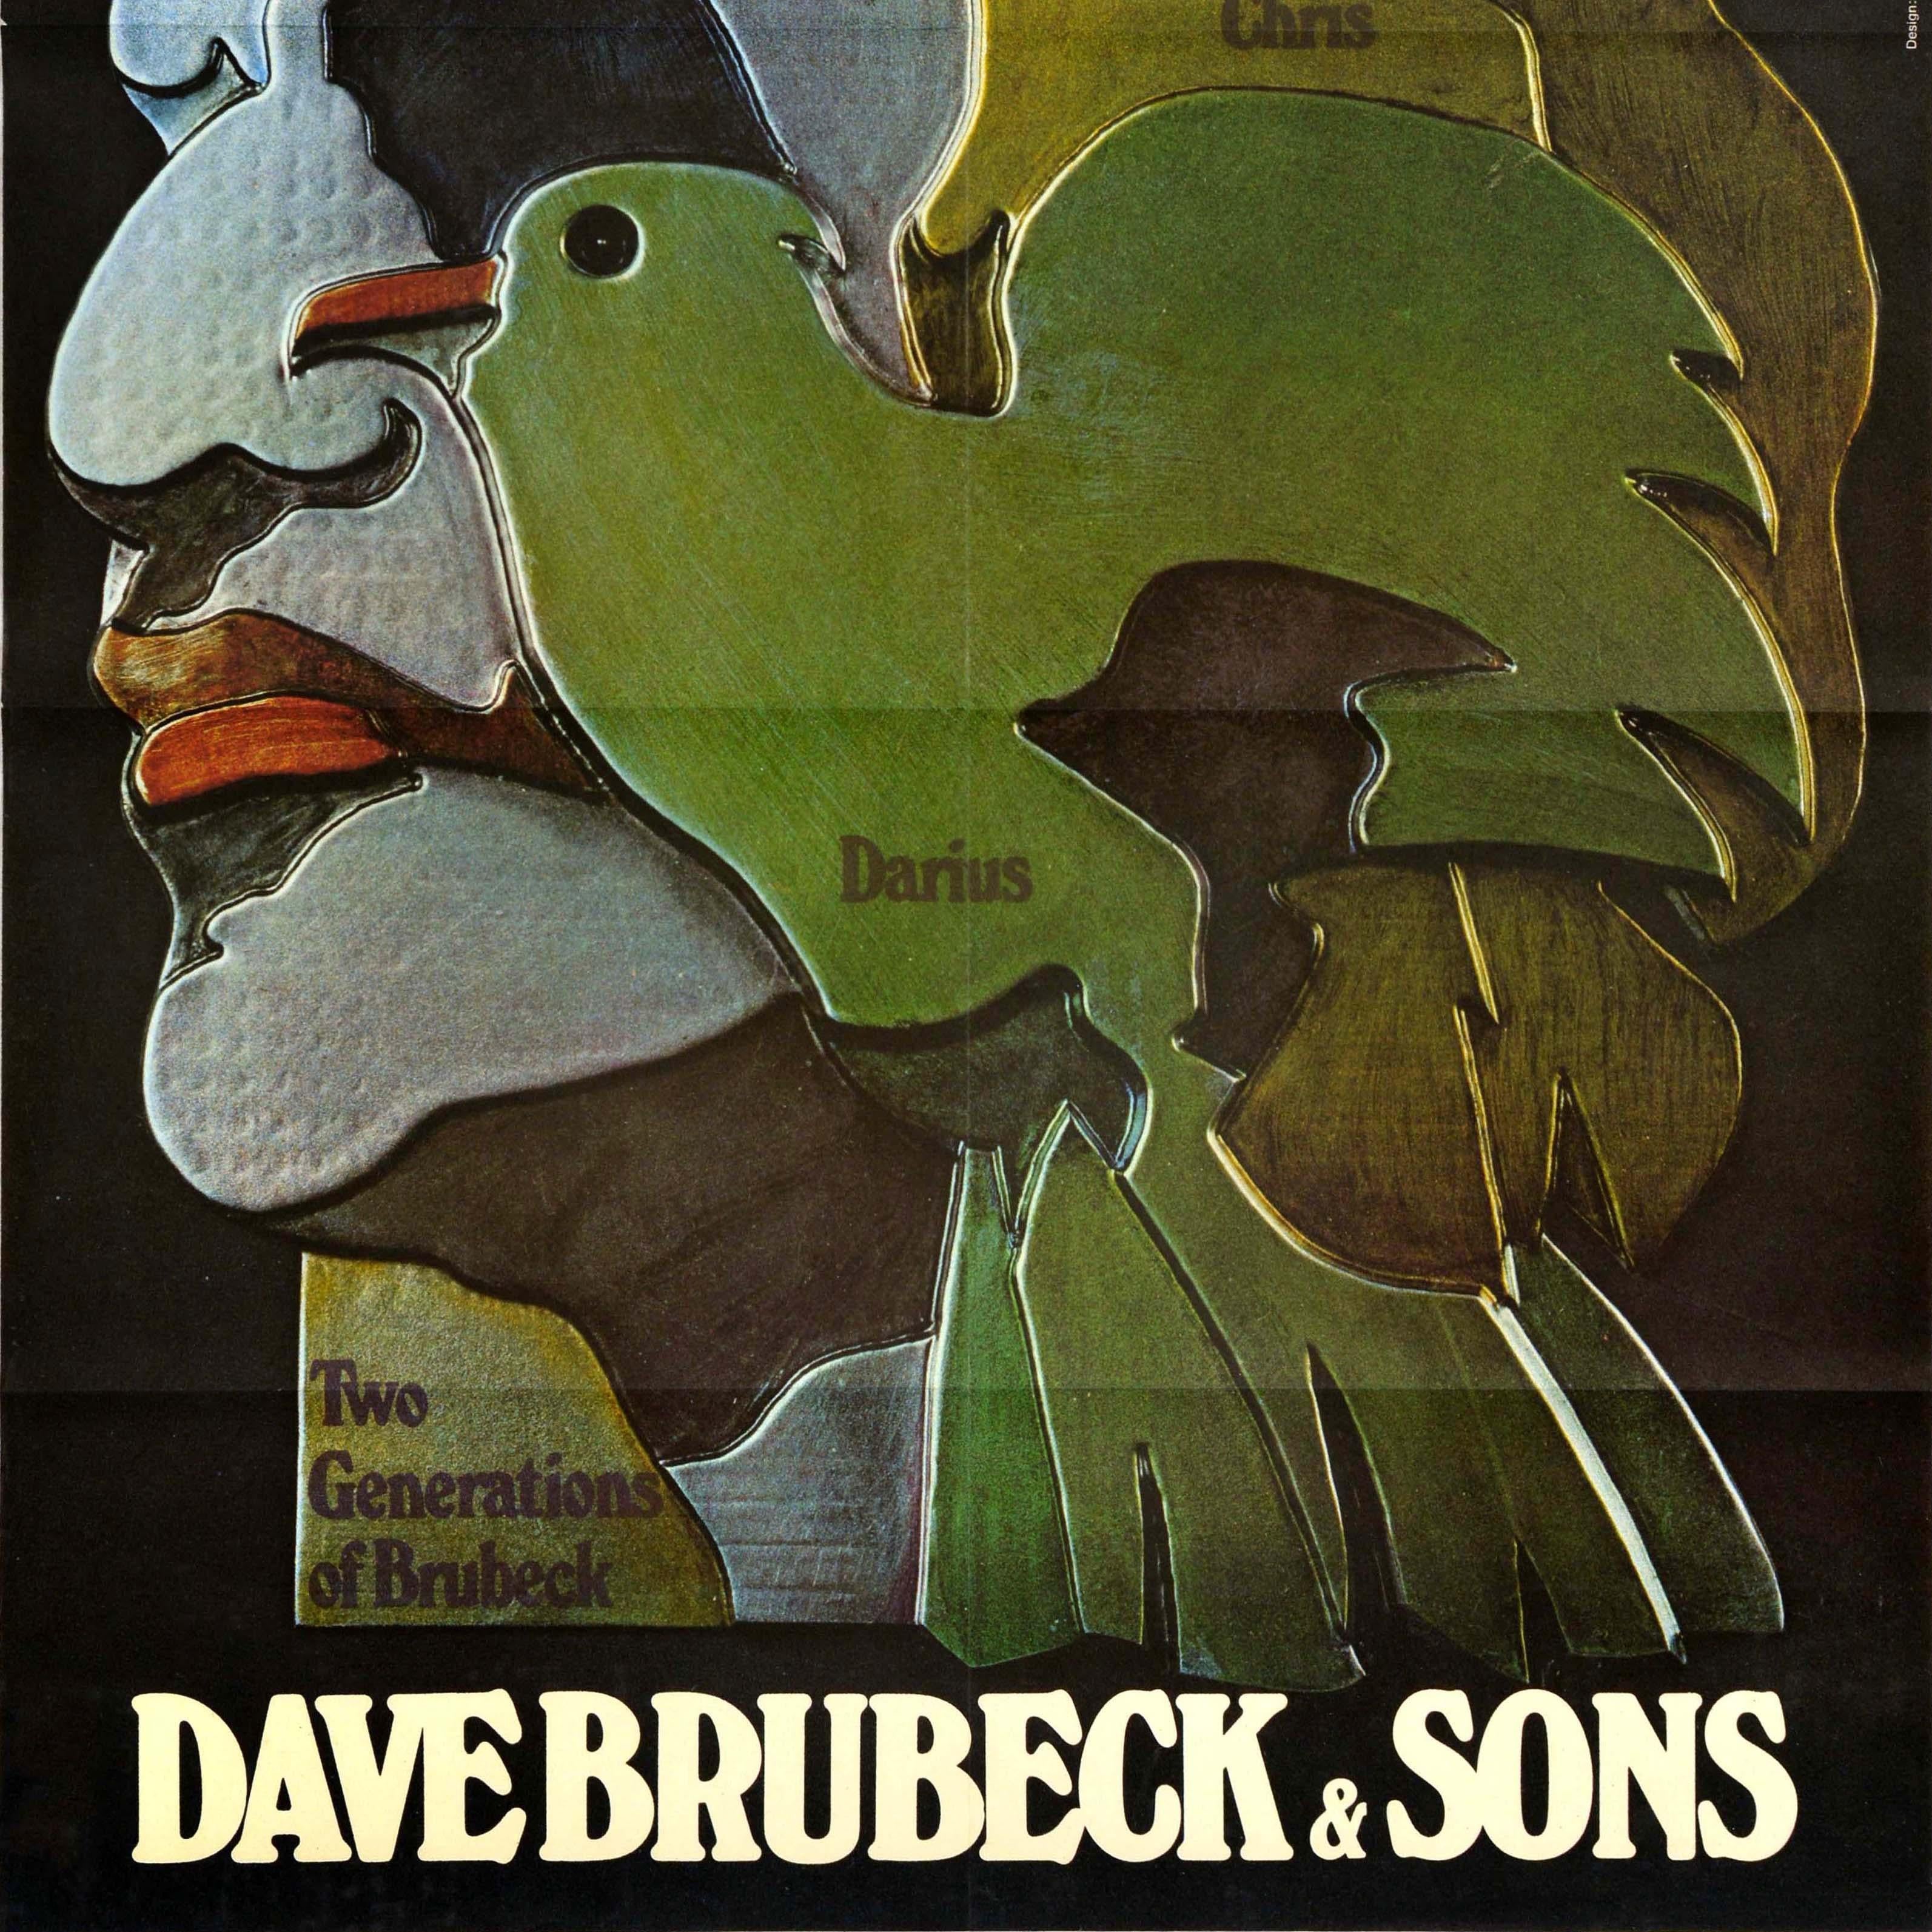 Original vintage music advertising poster for Dave Brubeck & Sons Two Generations of Brubeck featuring a stylised image of the face of the notable American jazz musician, composer and bandleader David Brubeck (David Warren Brubeck; 1920-2012)